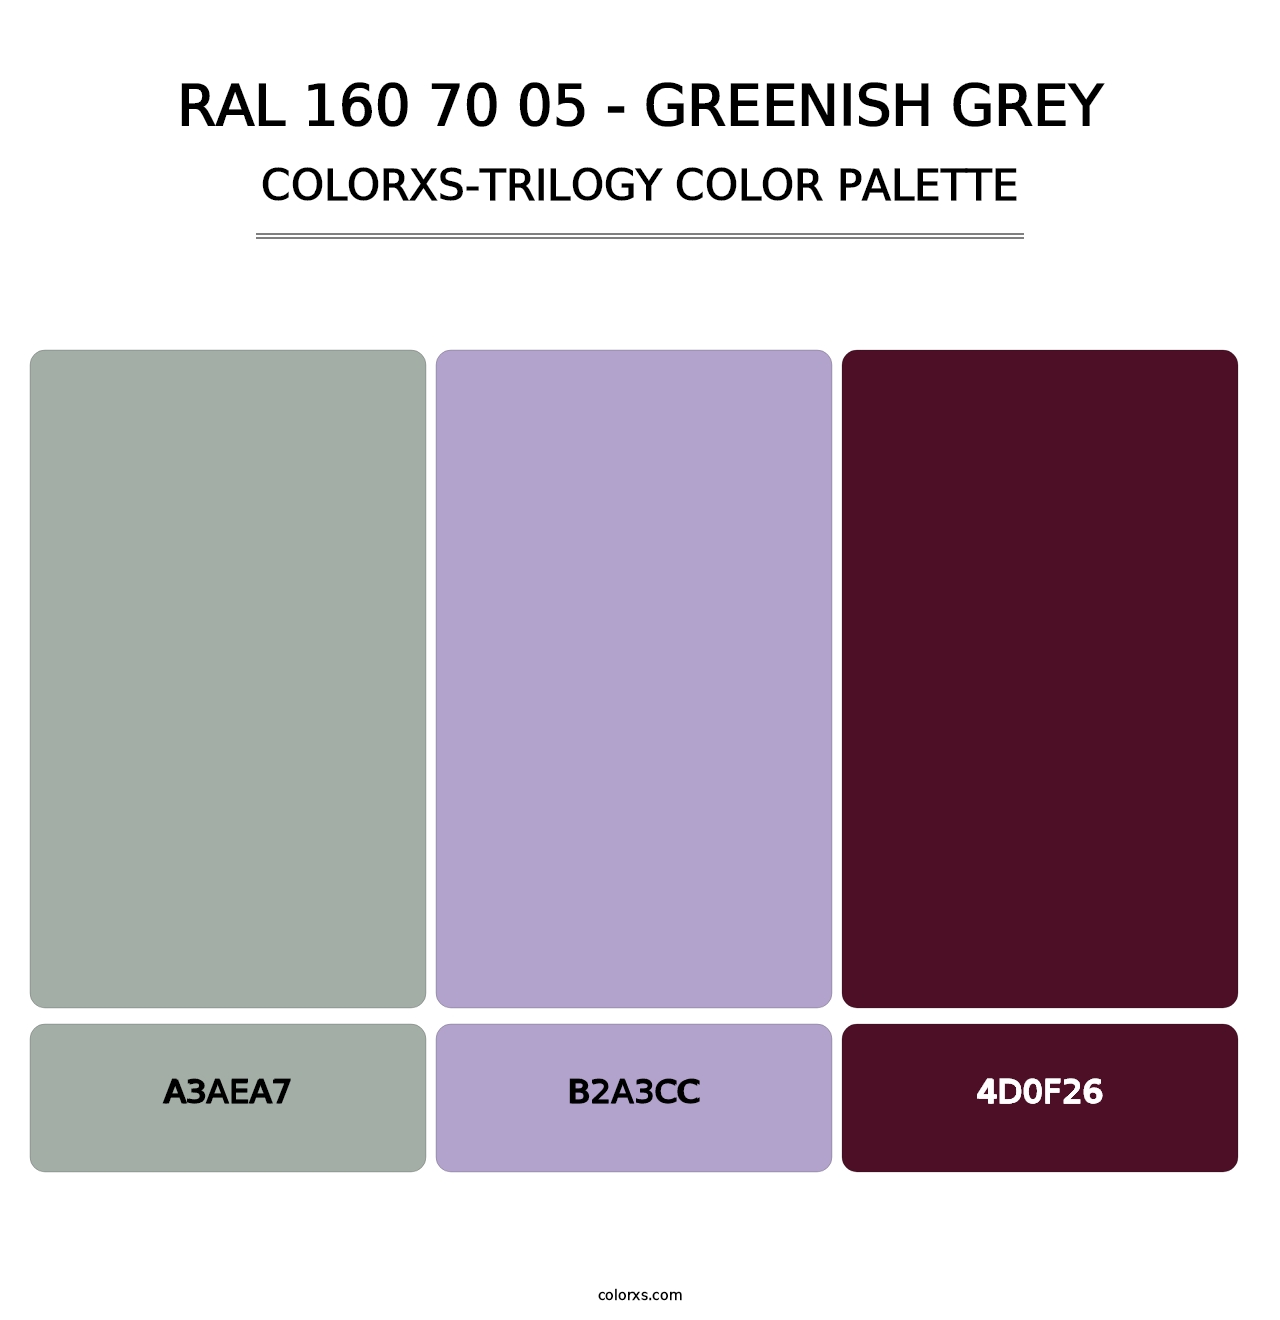 RAL 160 70 05 - Greenish Grey - Colorxs Trilogy Palette